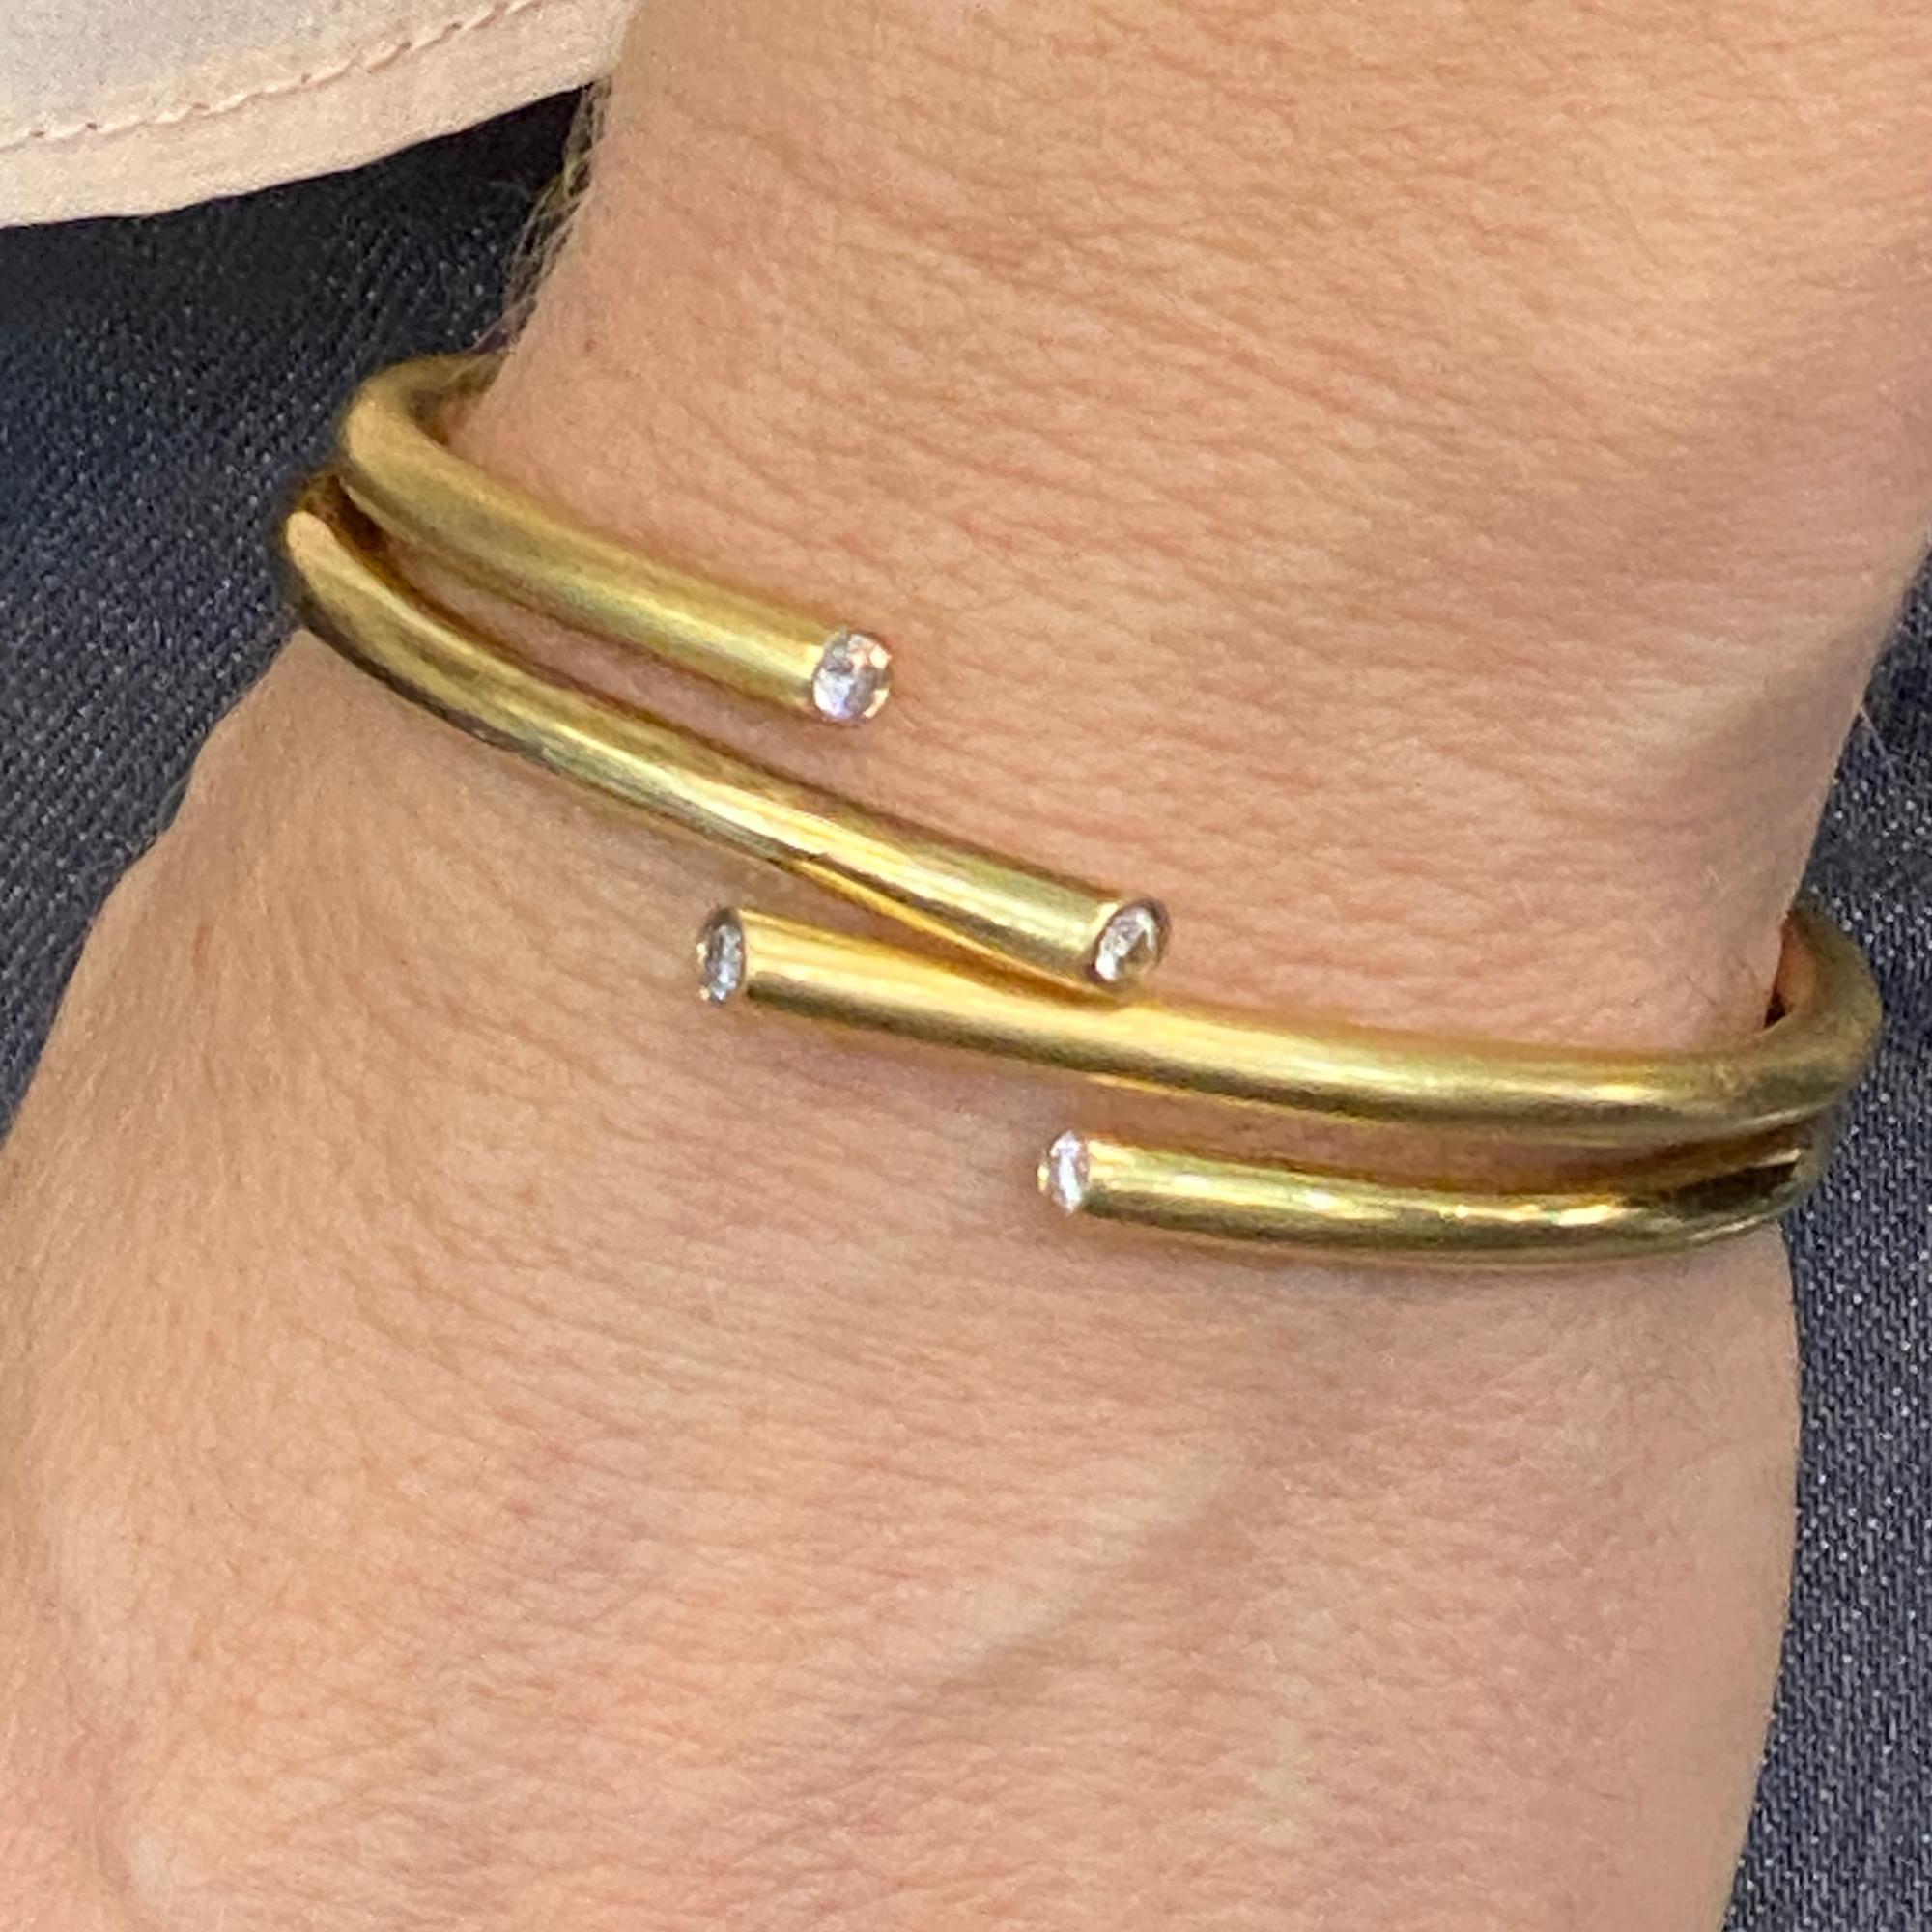 Fabulous hinged cuff bracelet by Greek designer Zolotas. The bypass modern cuff features four diamond endcaps (.40 CTW). The cuff is a mixture of high polish and satin finish gold. The bracelet measures .75 inches in width, and 2.25 inches in